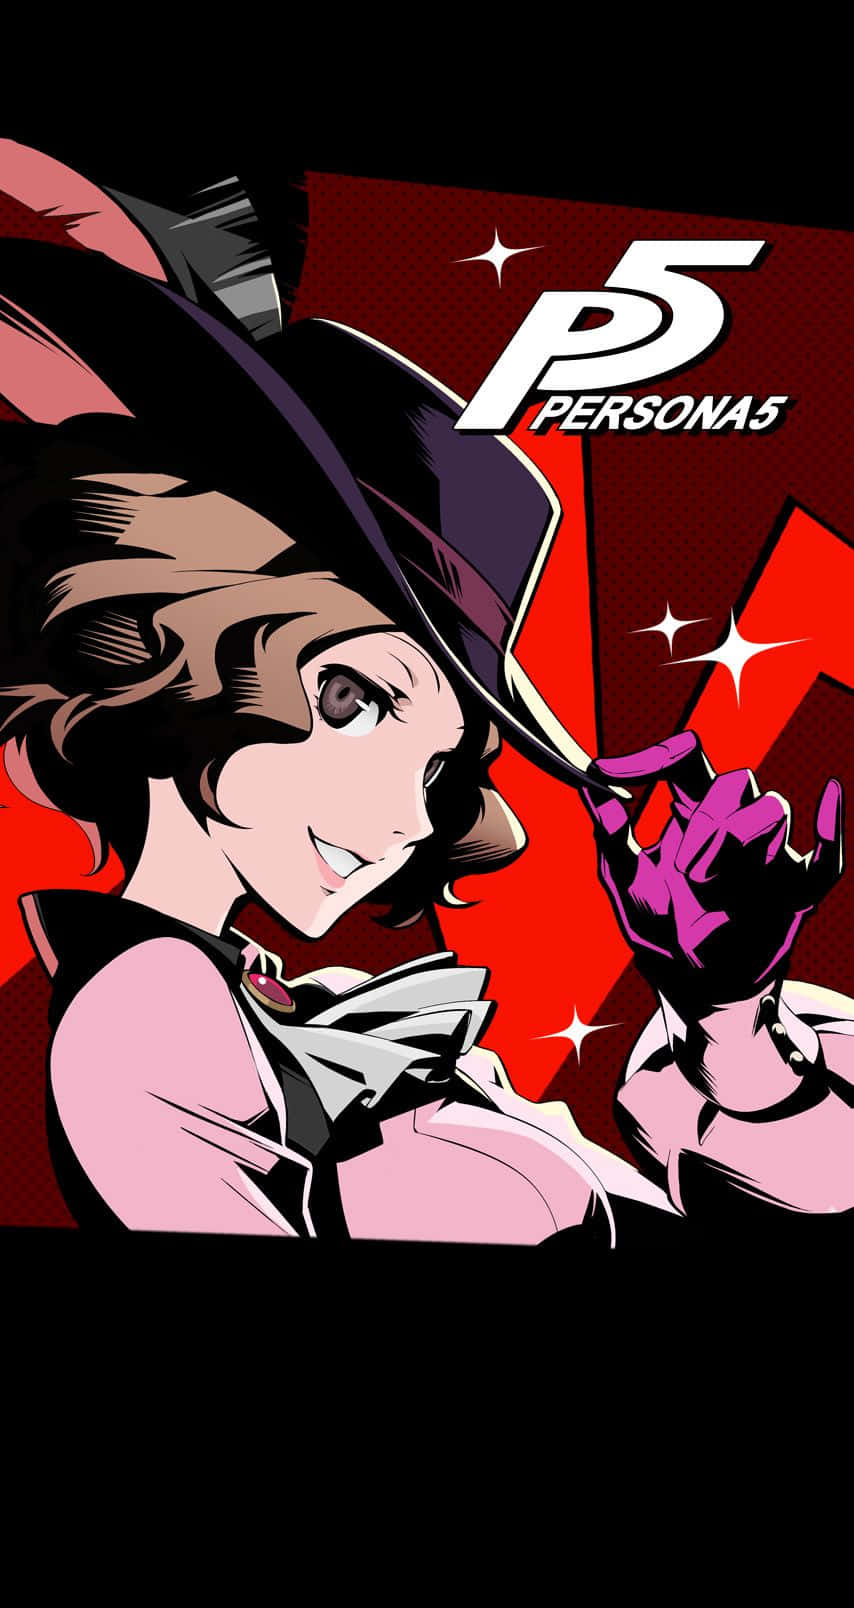 "Joker From the Video Game Hit ‘Persona 5'" Wallpaper